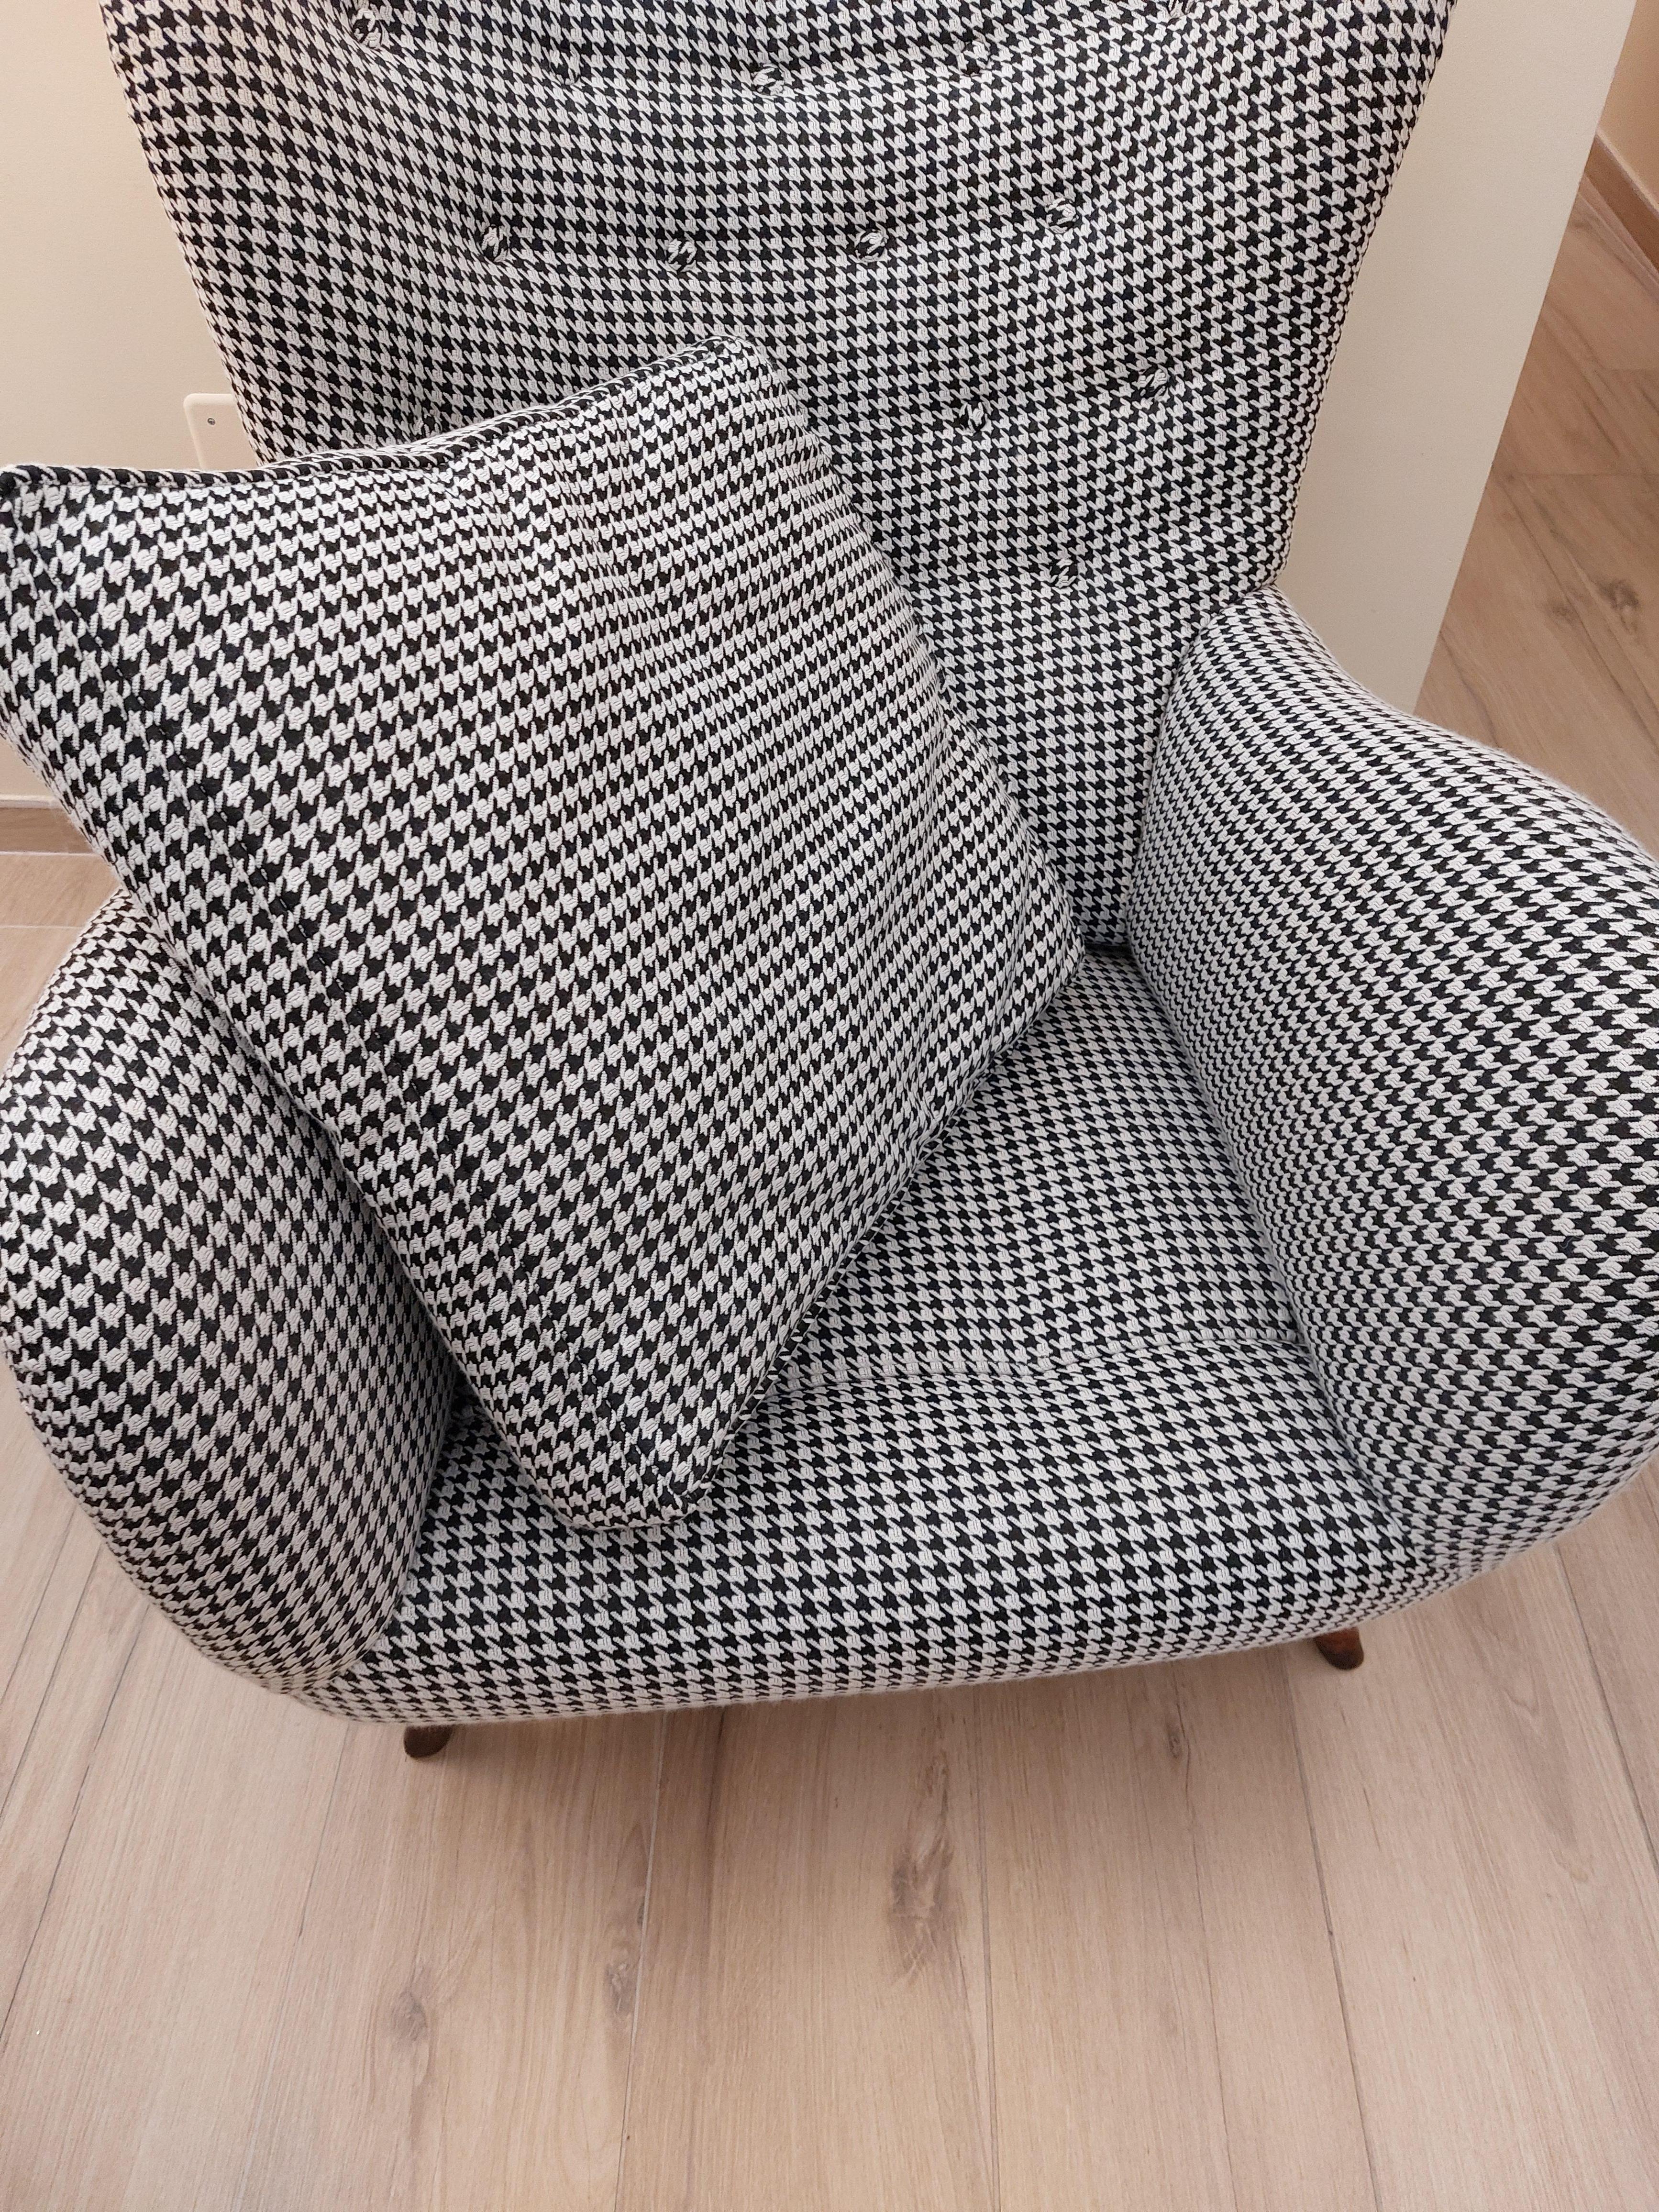 Italian '40s Armchair with New Houndstooth Upholstery